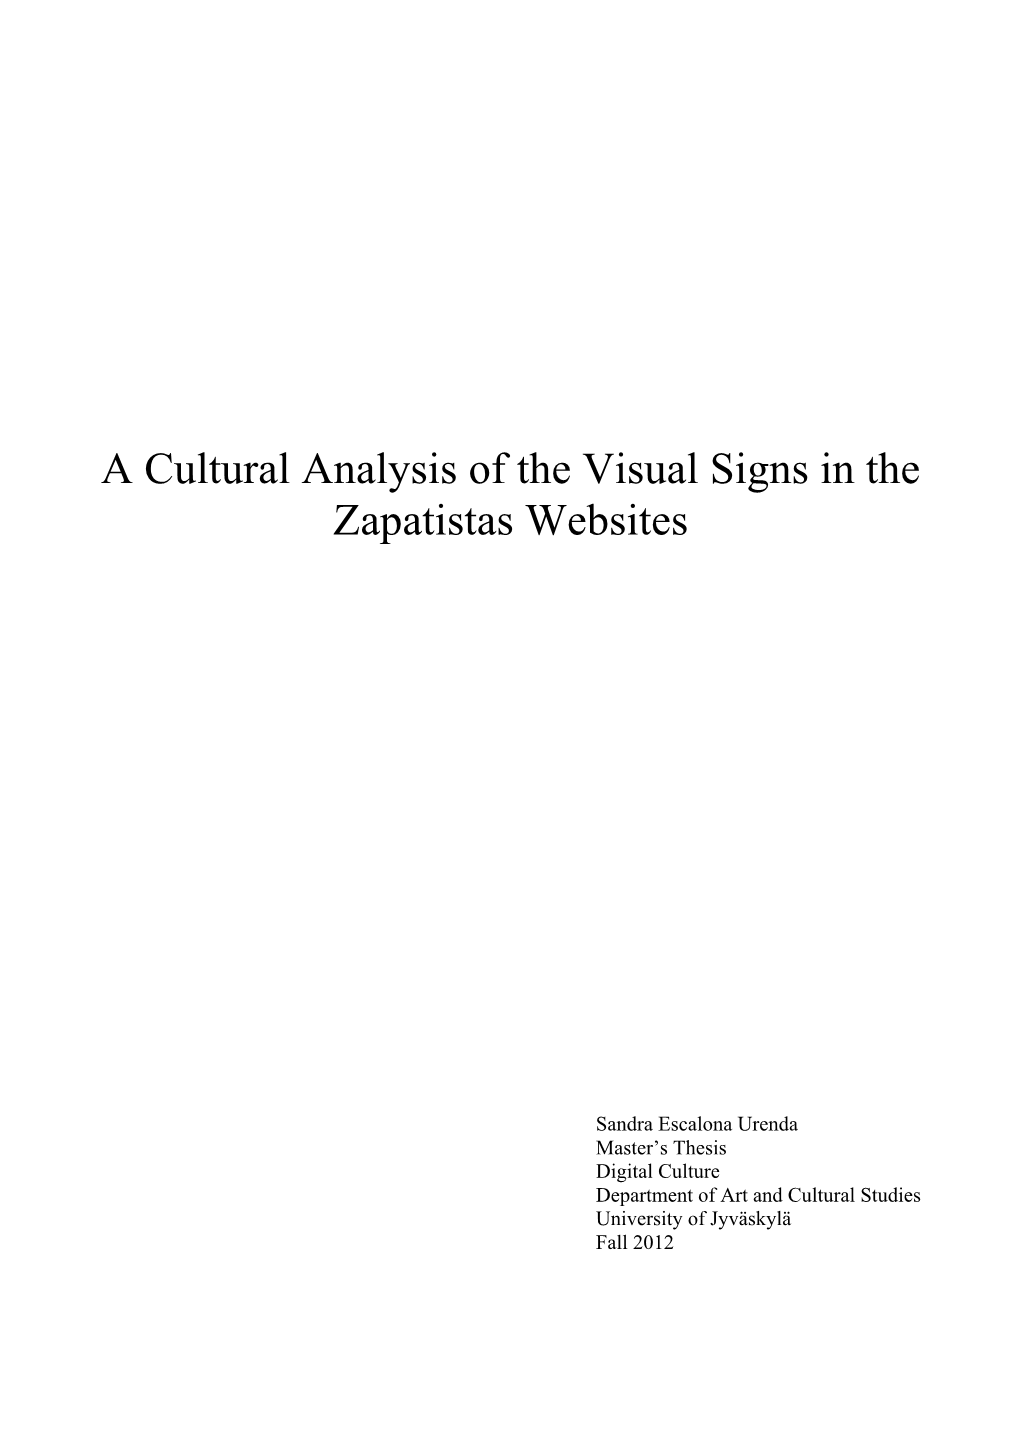 A Cultural Analysis of the Visual Signs in the Zapatistas Websites